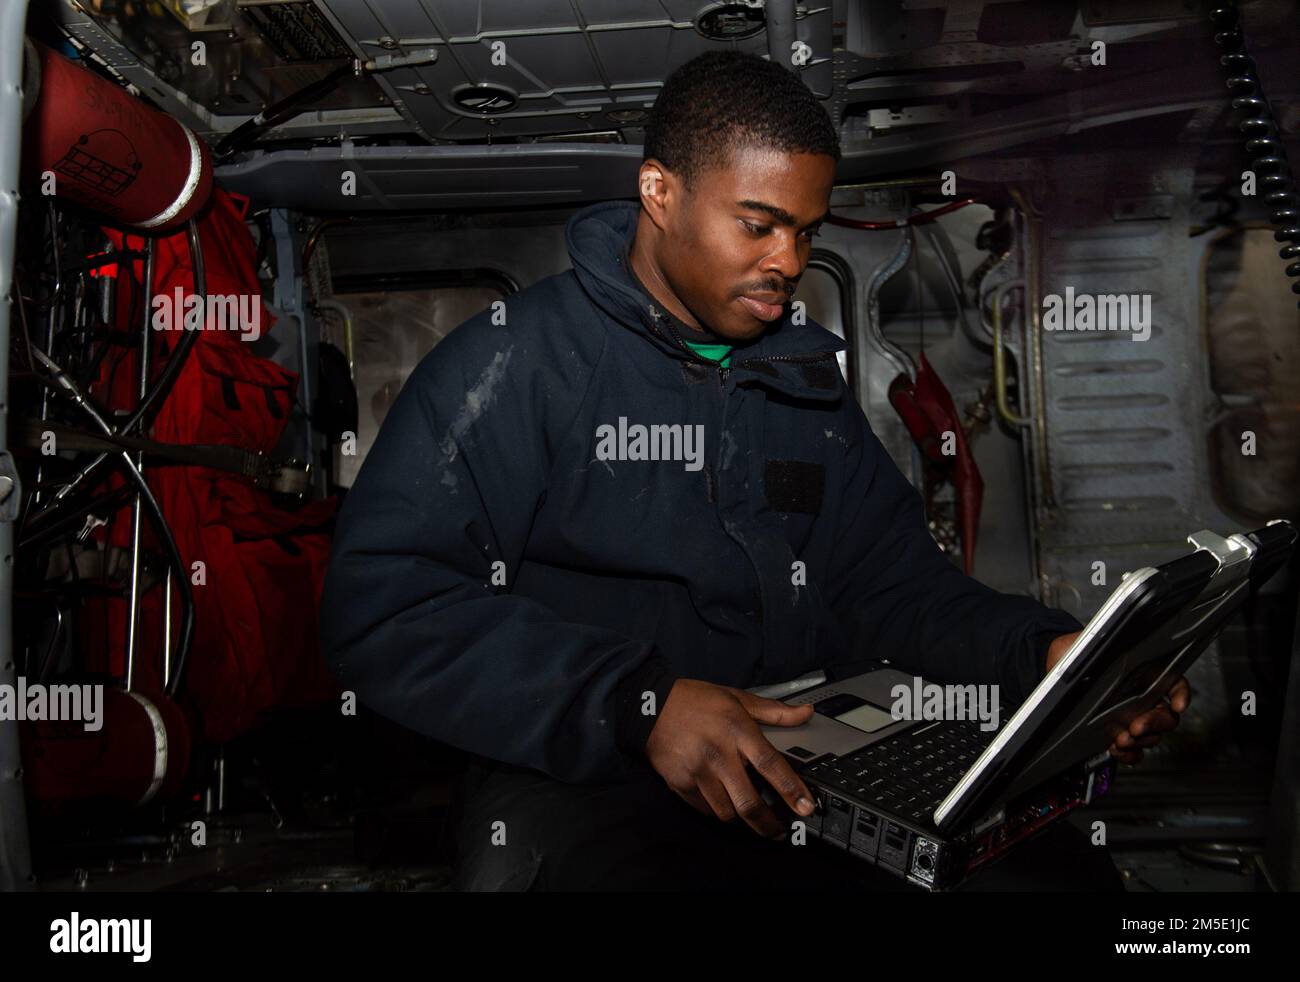 220306-N-CY569-1038 AEGEAN SEA (Mar. 6, 2022) Aviation Structural Mechanic 2nd Class Godwin Afenu, from Dumfries, Virginia, assigned to the 'Dragonslayers' of Helicopter Sea Combat Squadron (HSC) 11, inspects the landing gear pressure of an MH-60S Sea Hawk helicopter in the hanger bay of the Nimitz-class aircraft carrier USS Harry S. Truman (CVN 75), Mar. 6, 2022. The Harry S. Truman Carrier Strike Group is on a scheduled deployment in the U.S. Sixth Fleet area of operations in support of U.S., allied and partner interests in Europe and Africa. Stock Photo